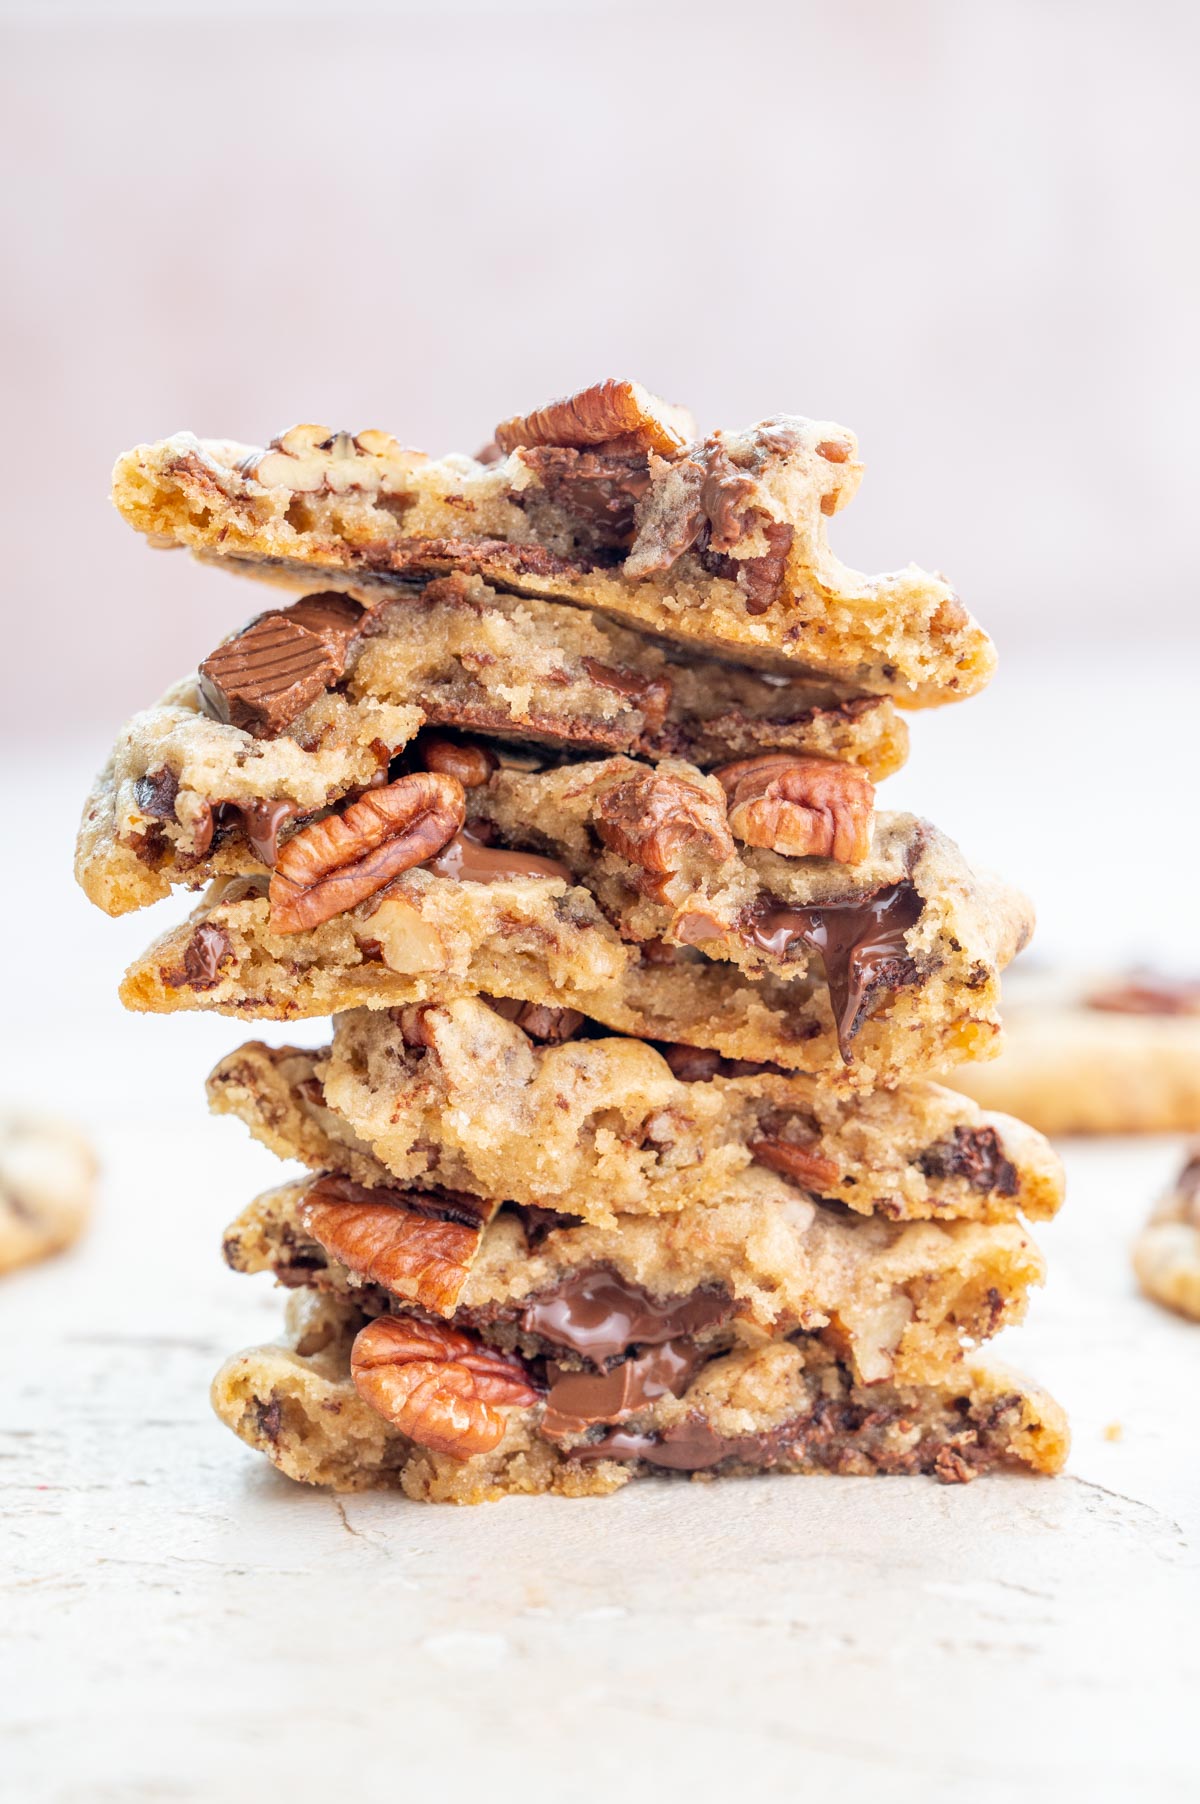 A stack of chocolate chip pecan cookies.